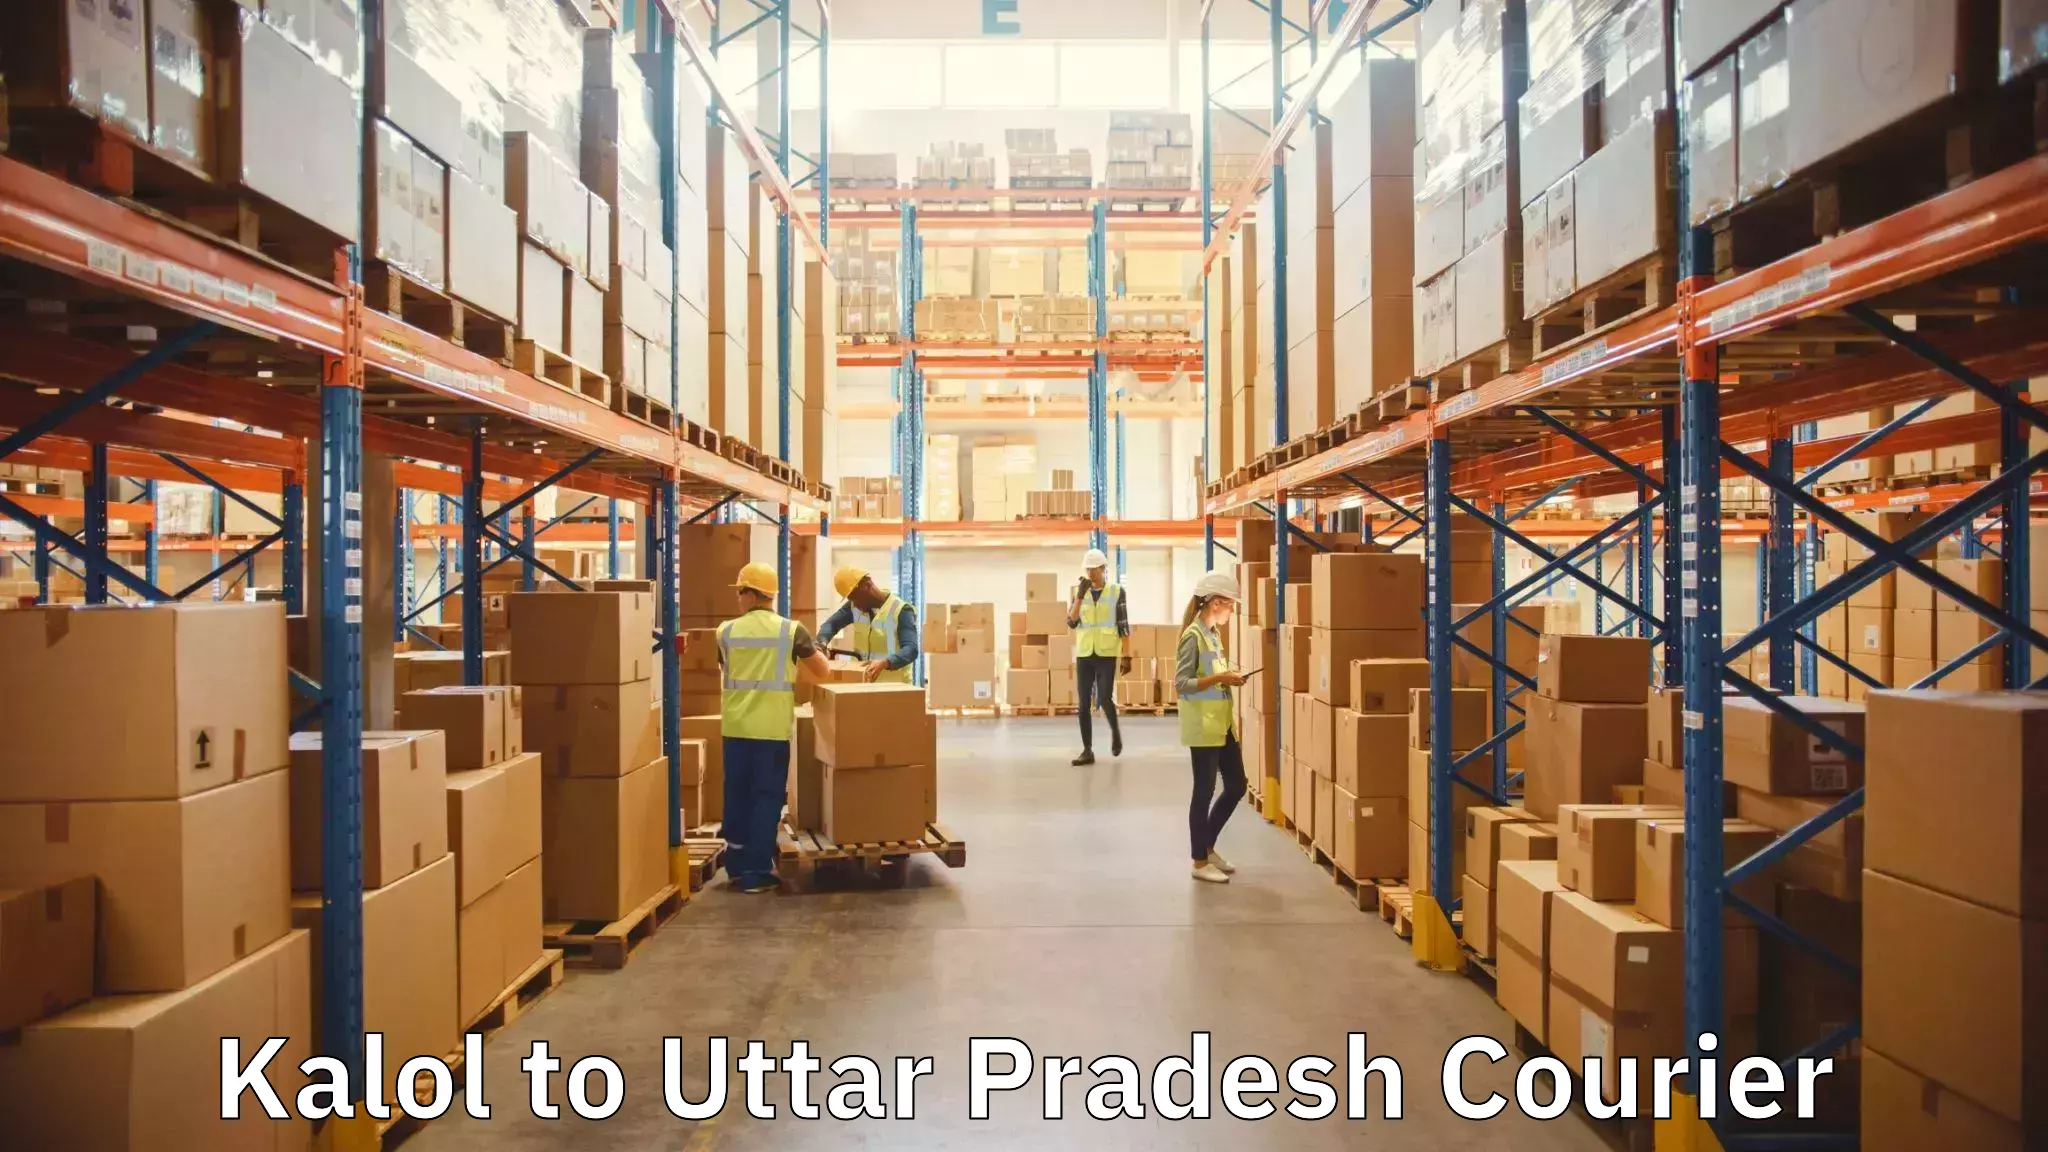 Comprehensive relocation services in Kalol to Mathura